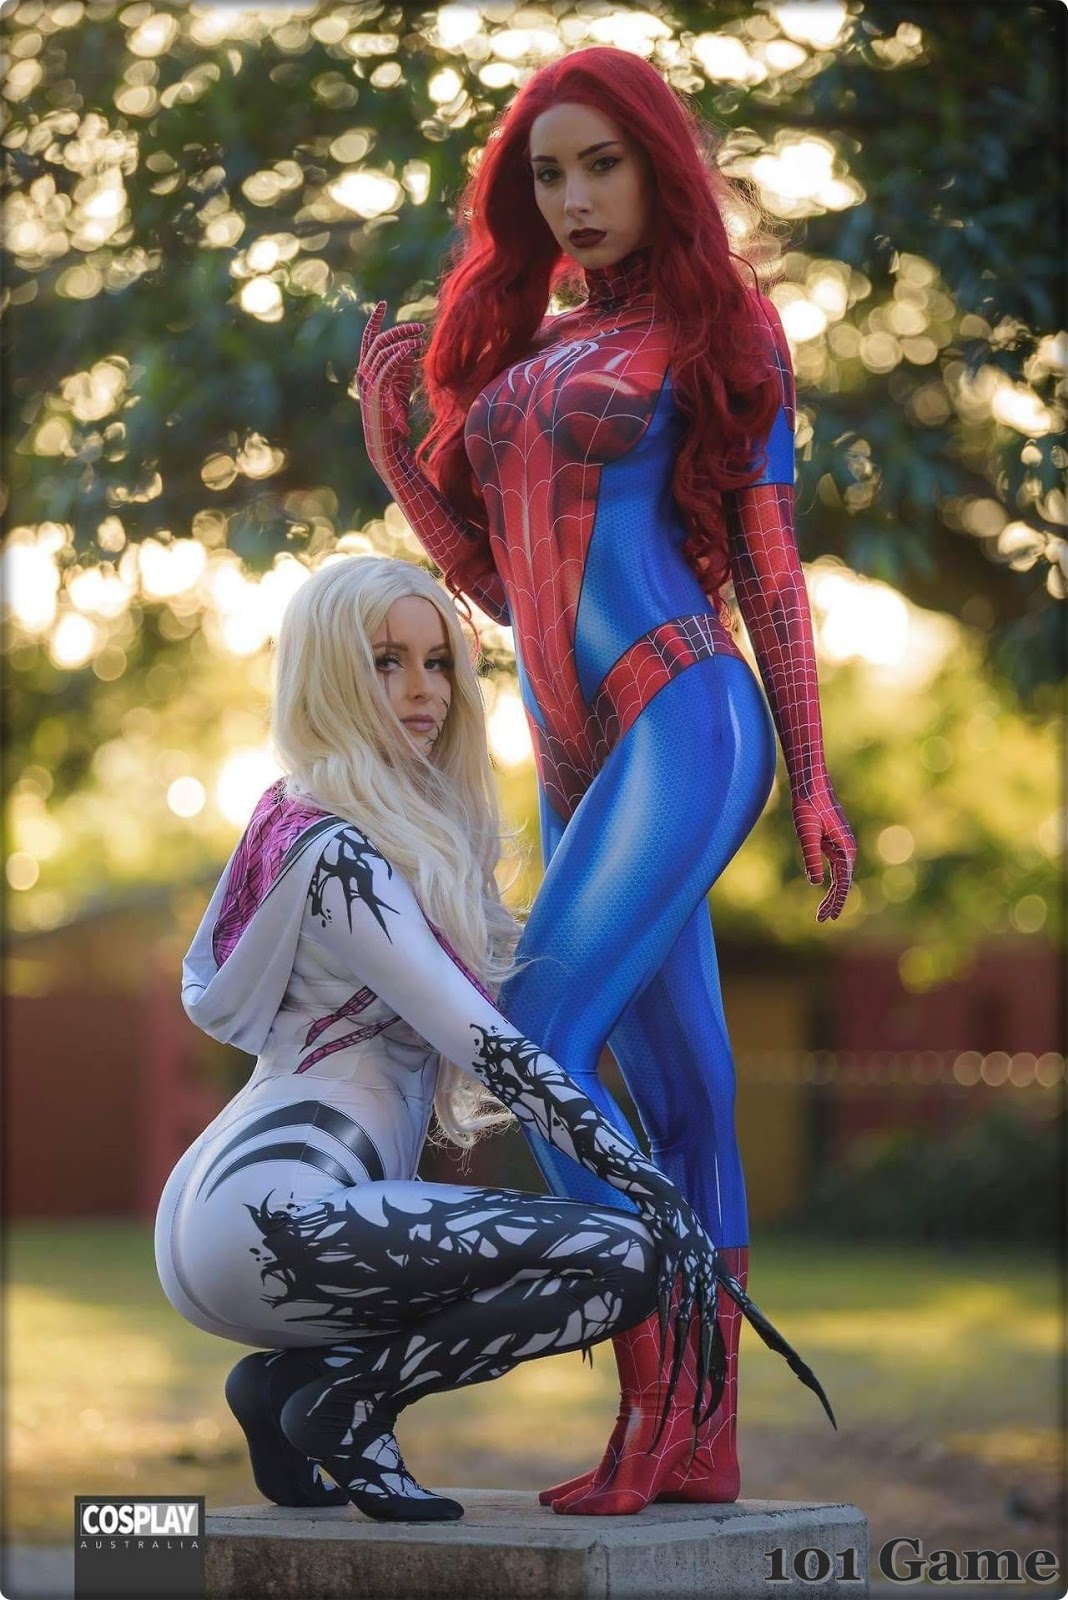 Spider Girl/Mary Jane Watson Crossover Cosplay by Vera Bambi